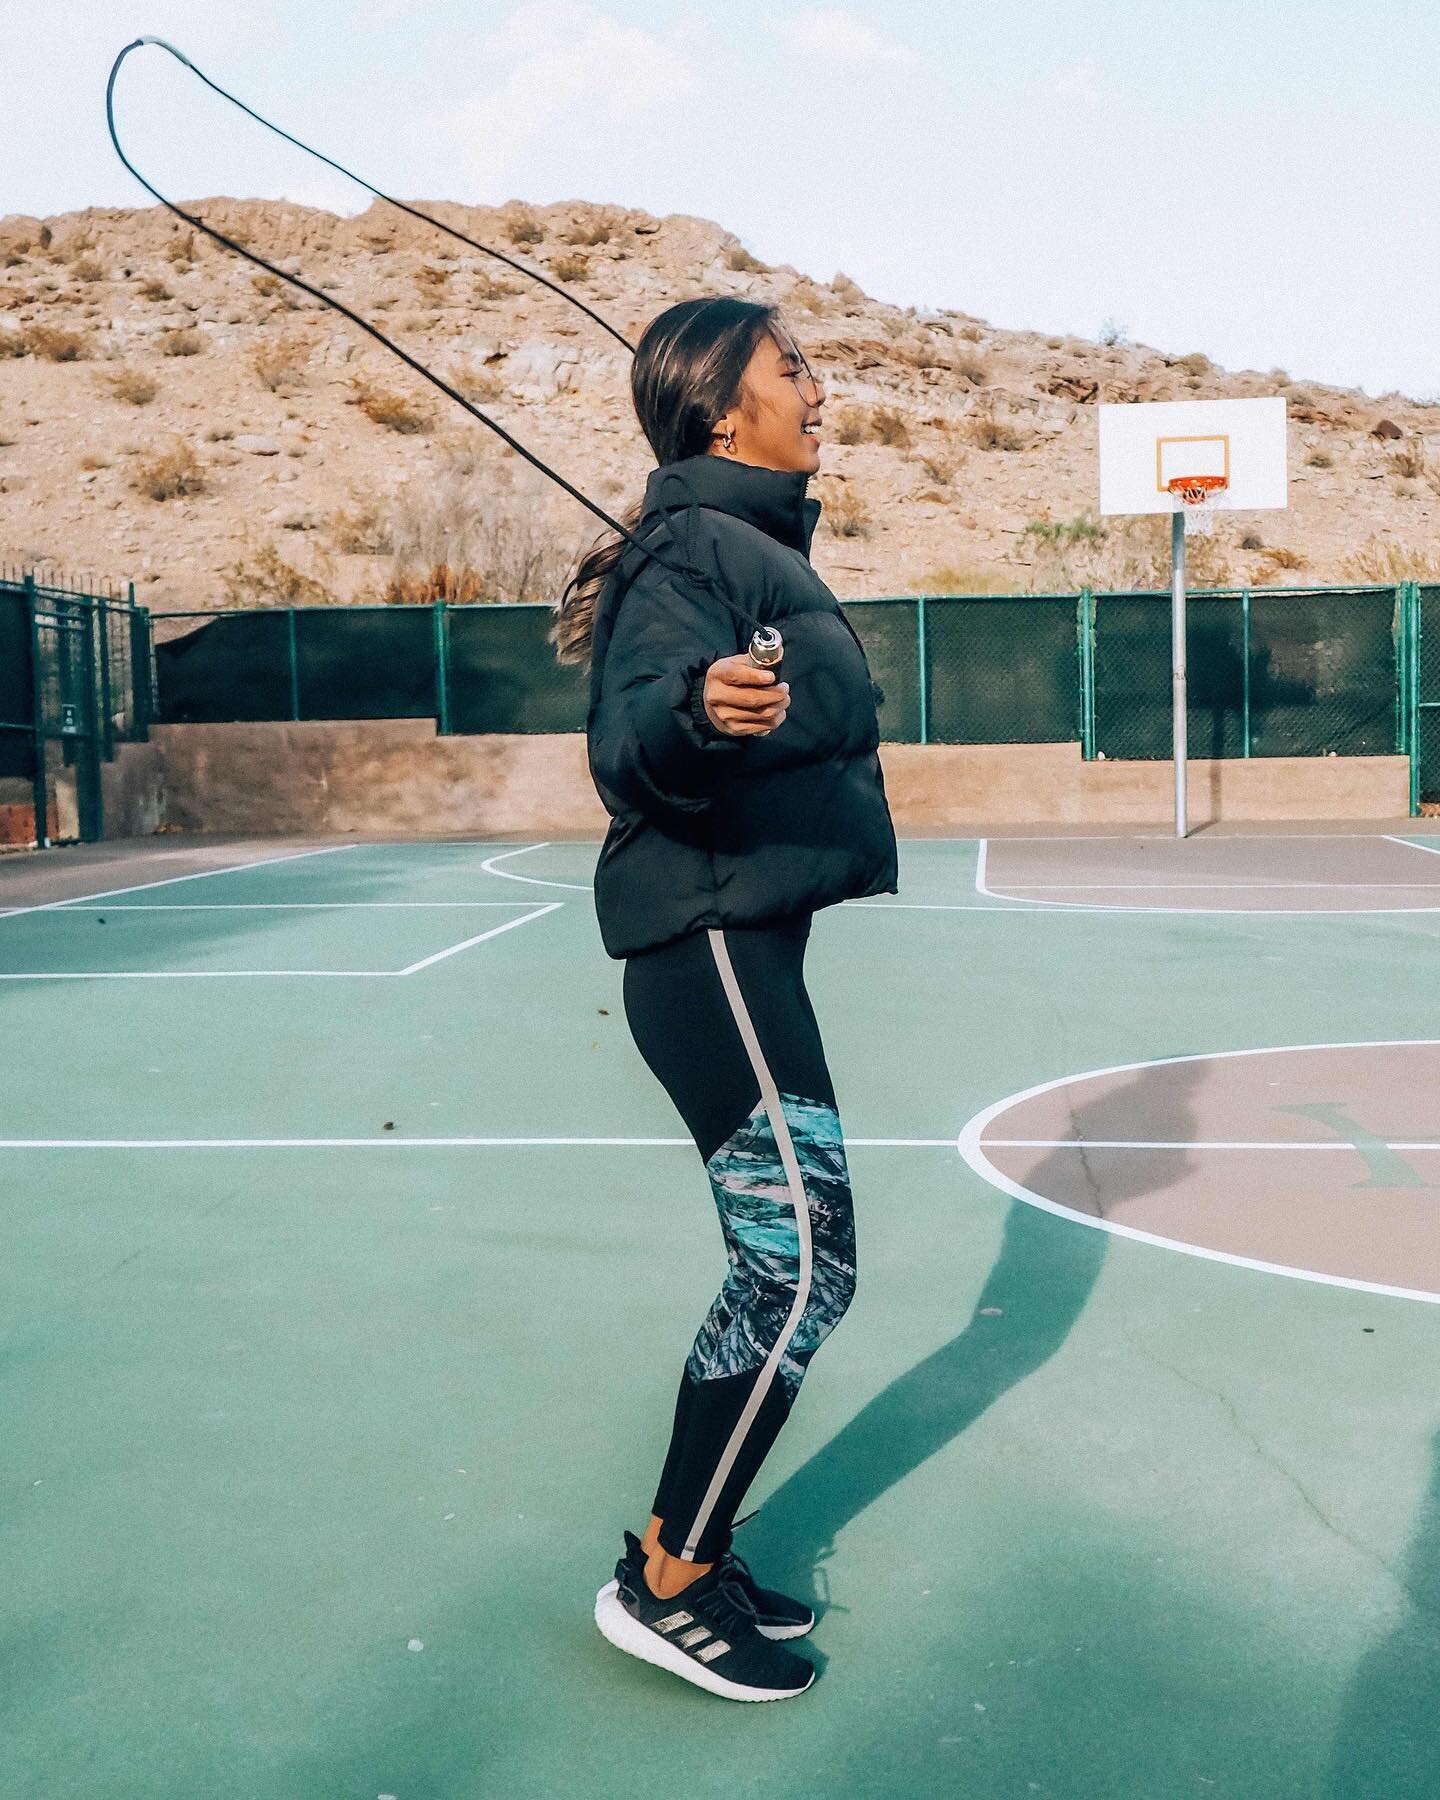 💪😼💙 Get your heart pumping with this jump rope, booty band, and body band! I recently joined the @strongleanhappy program, a simple digital fitness solution that offers fun but challenging workouts with minimal equipment. 

The platform has given 